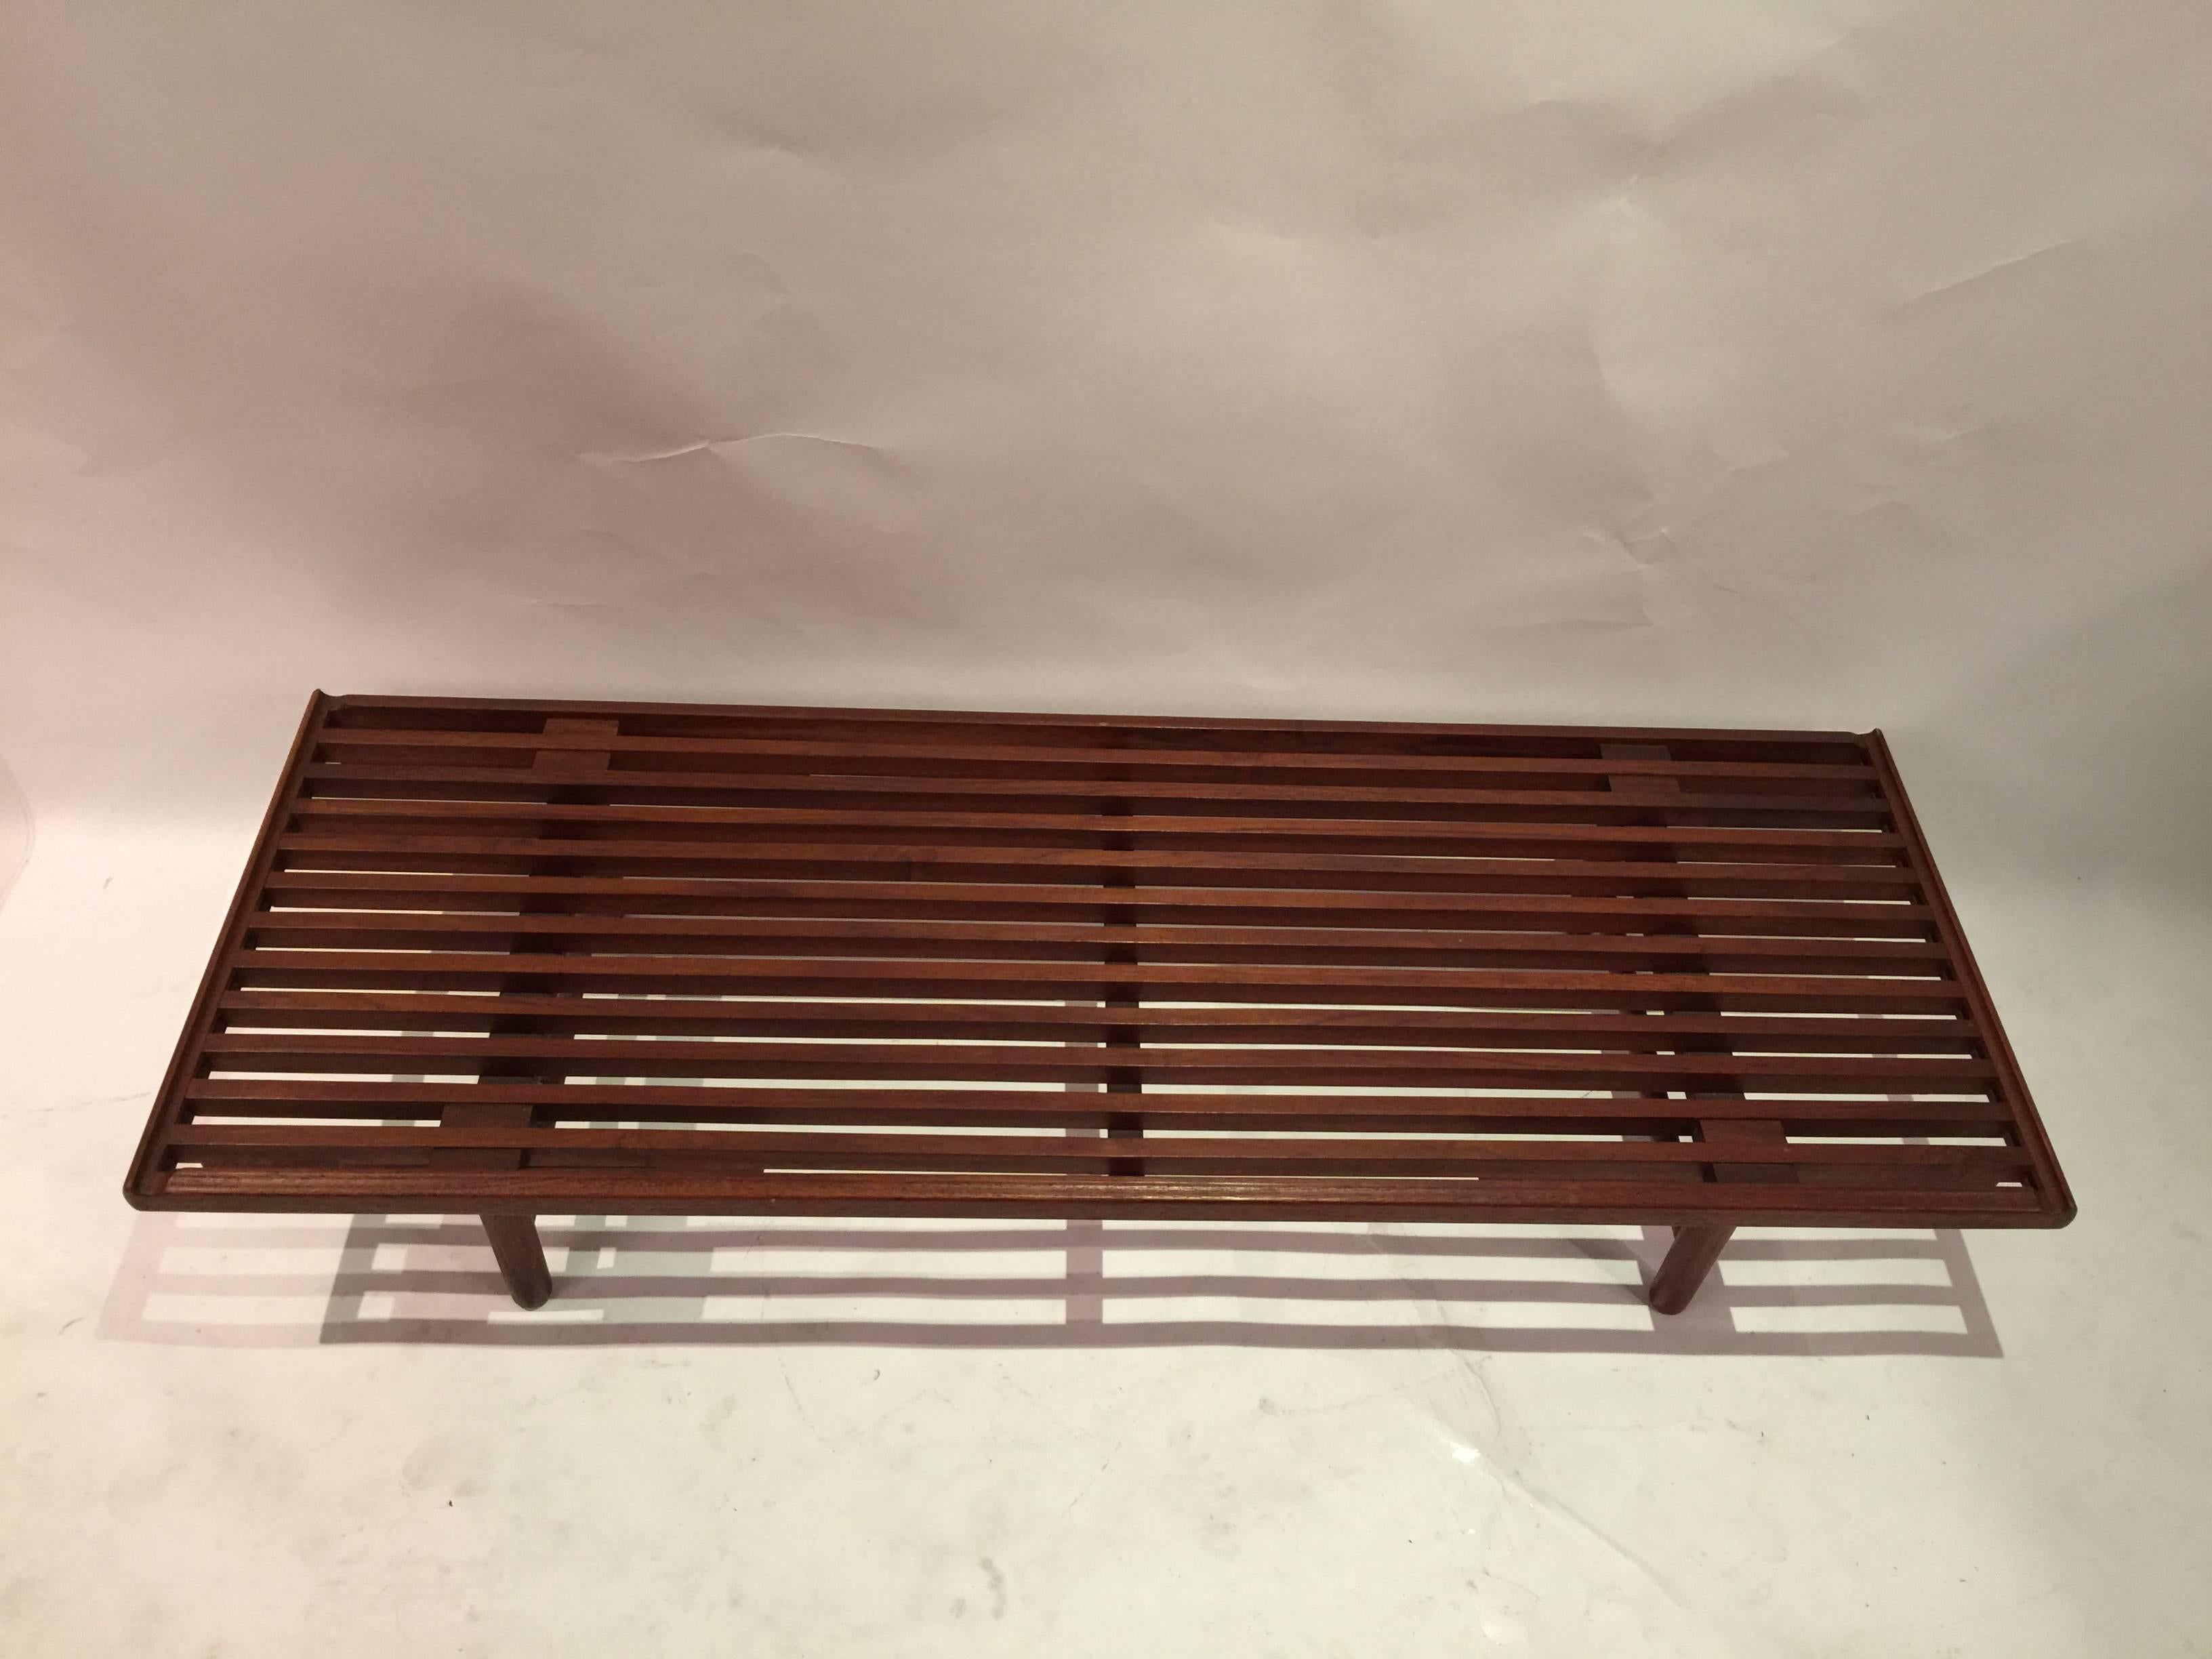 Nicely detailed old growth teak slat bench. Legs reminiscent of the designs of Poul Volther. Also features pleasing bevelled edges and high quality workmanship.